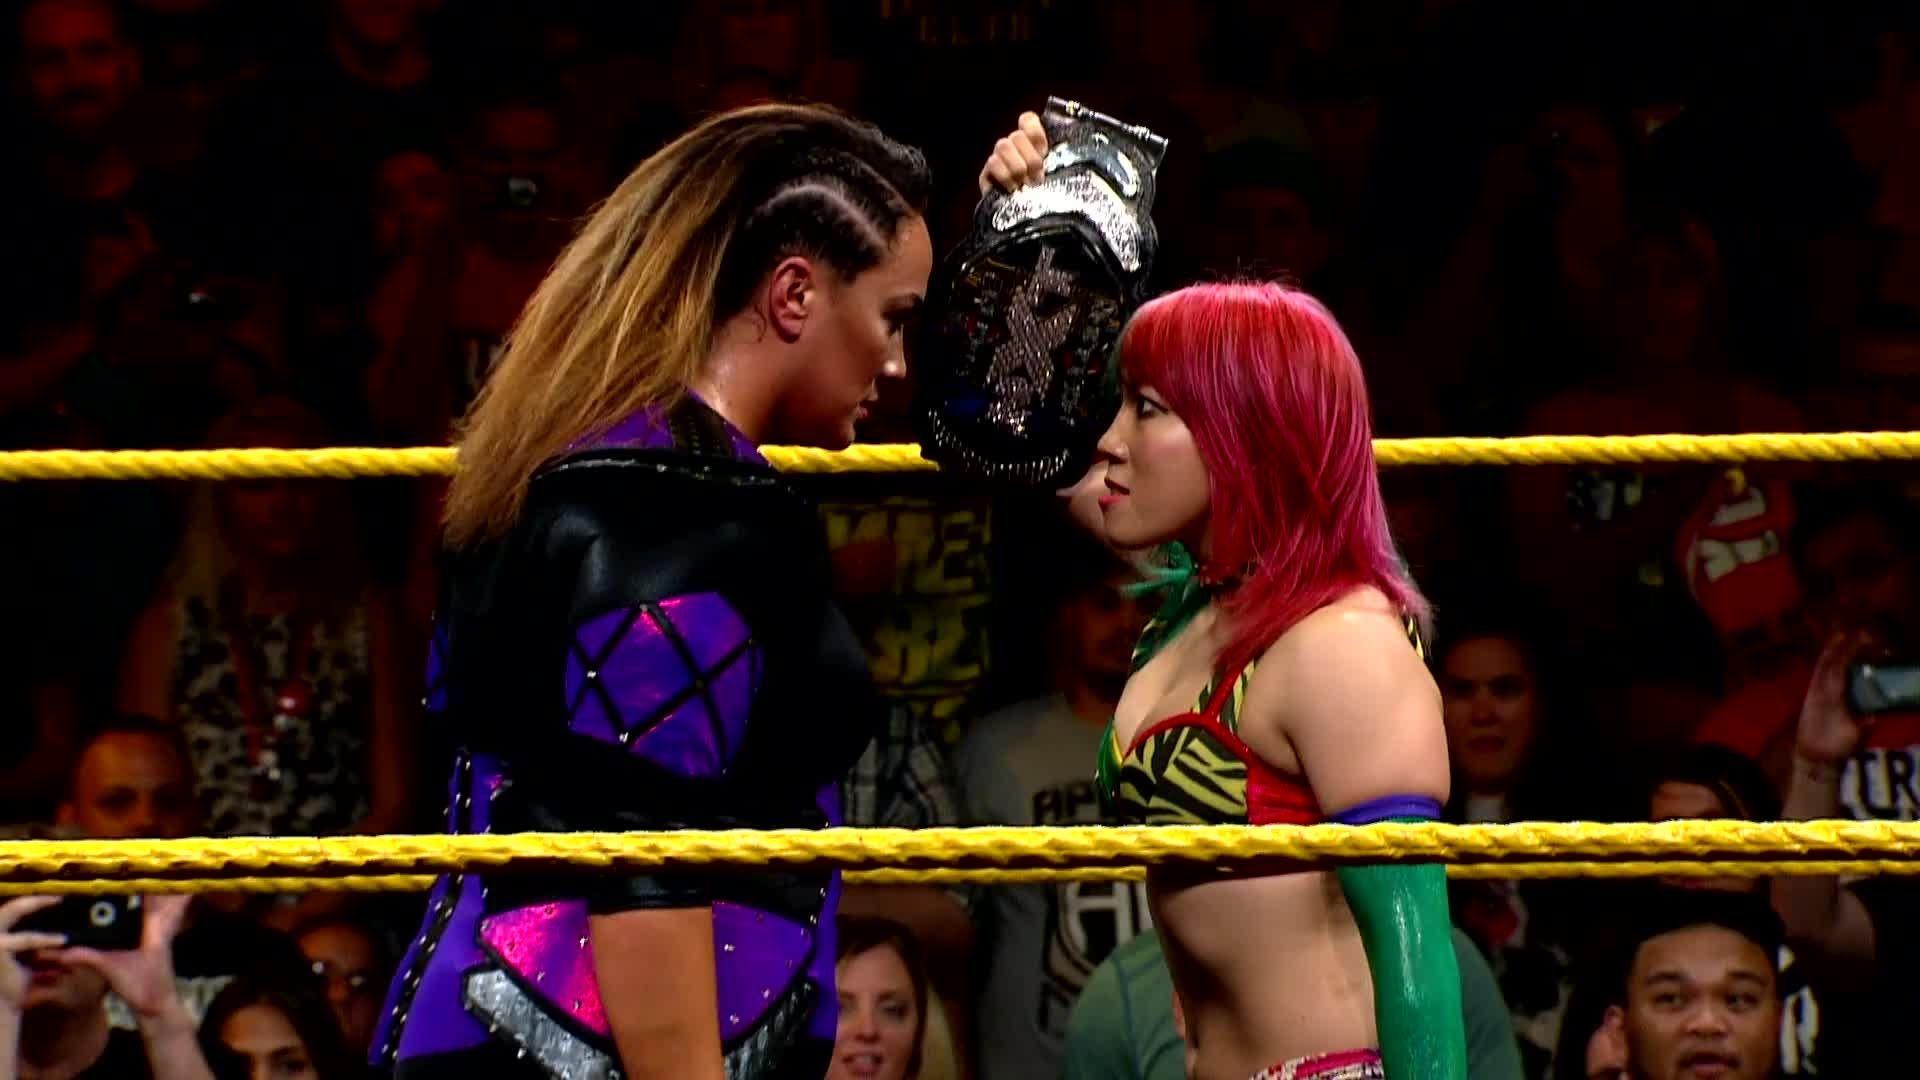 Asuka faces her toughest challenge yet in Nia Jax at NXT TakeOver